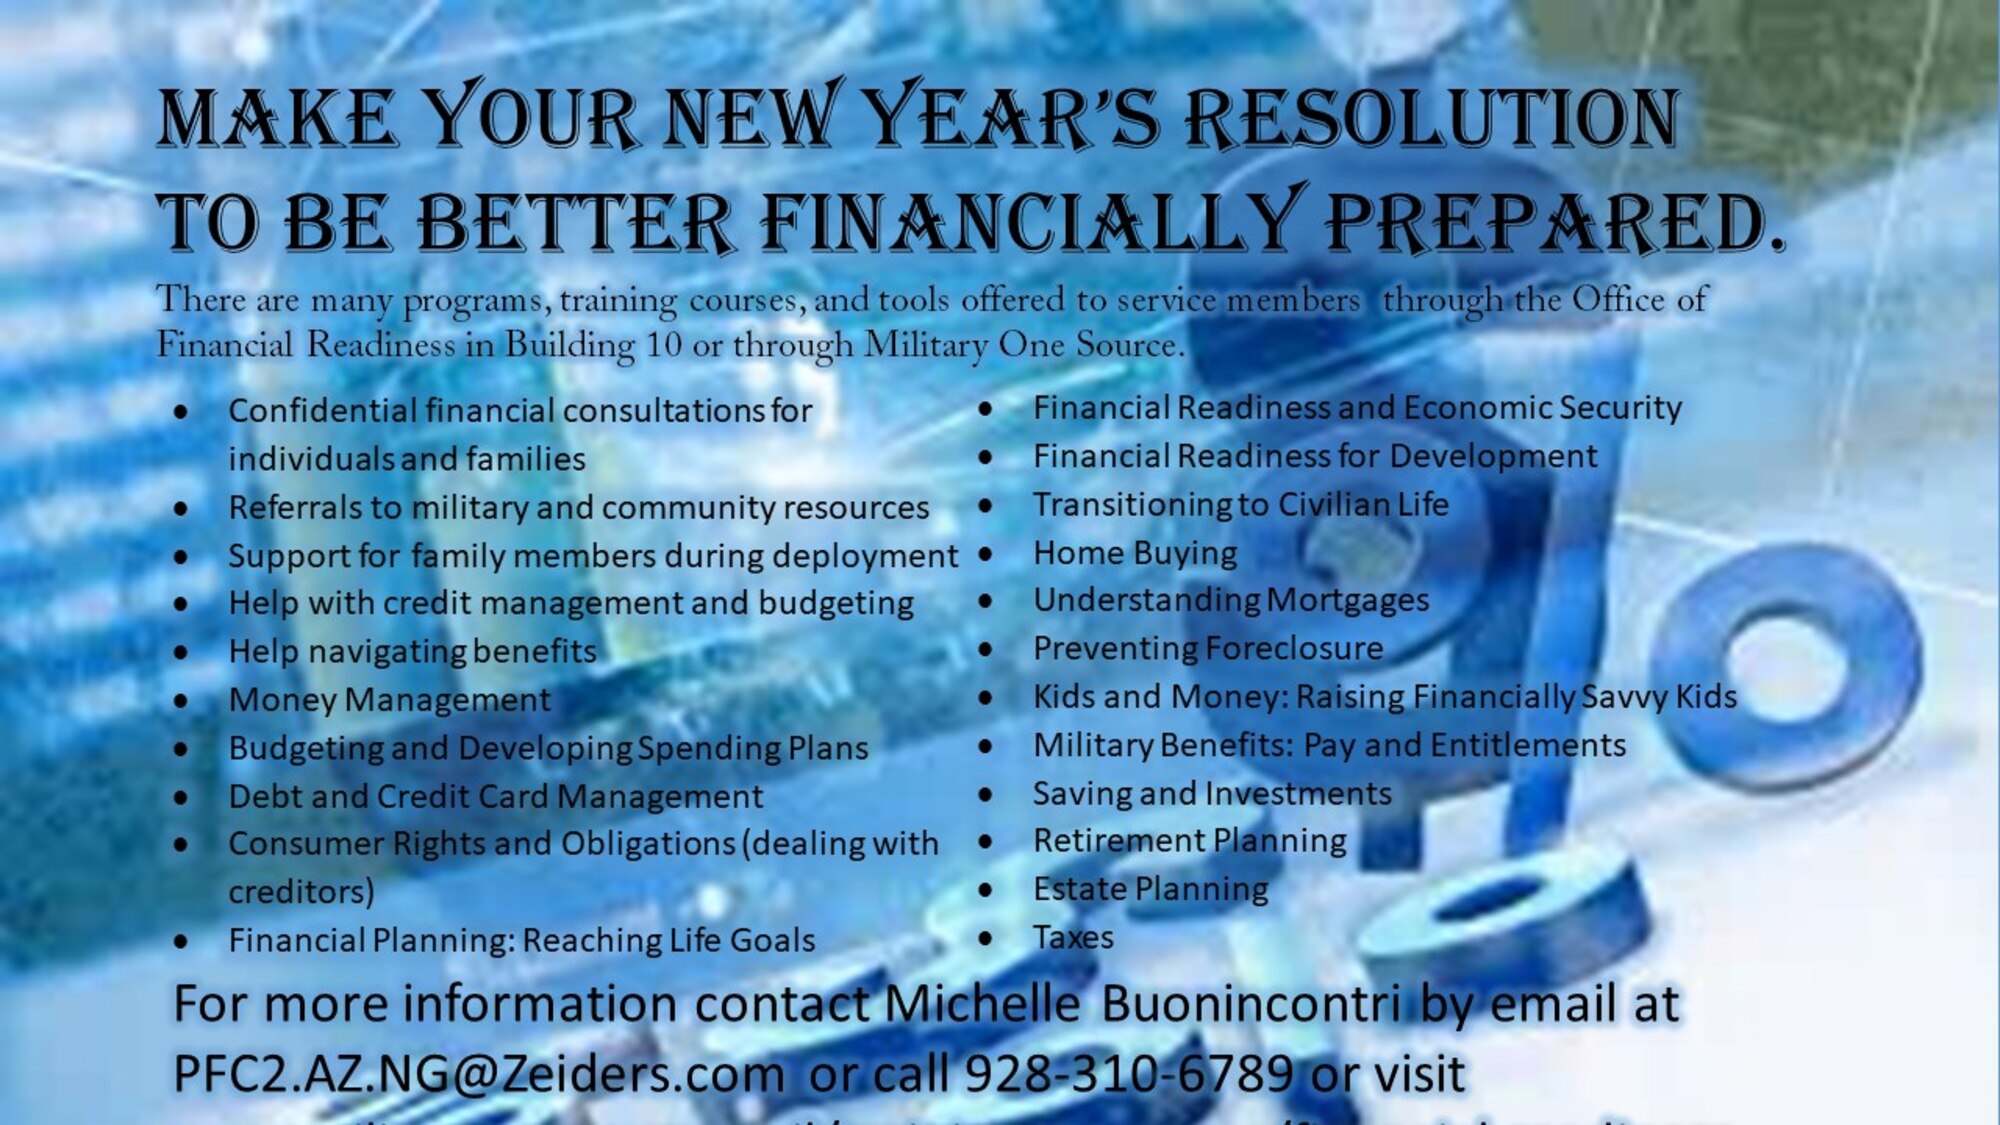 The New Year is here and it’s time to make good on those New Year’s resolutions. Airmen that haven’t recently reviewed their financial planning or budget, this is the perfect time to take some simple steps to insure they are financially set for 2019. (U.S. Air National Guard Infographic by Staff Sgt. Dillion Davis)